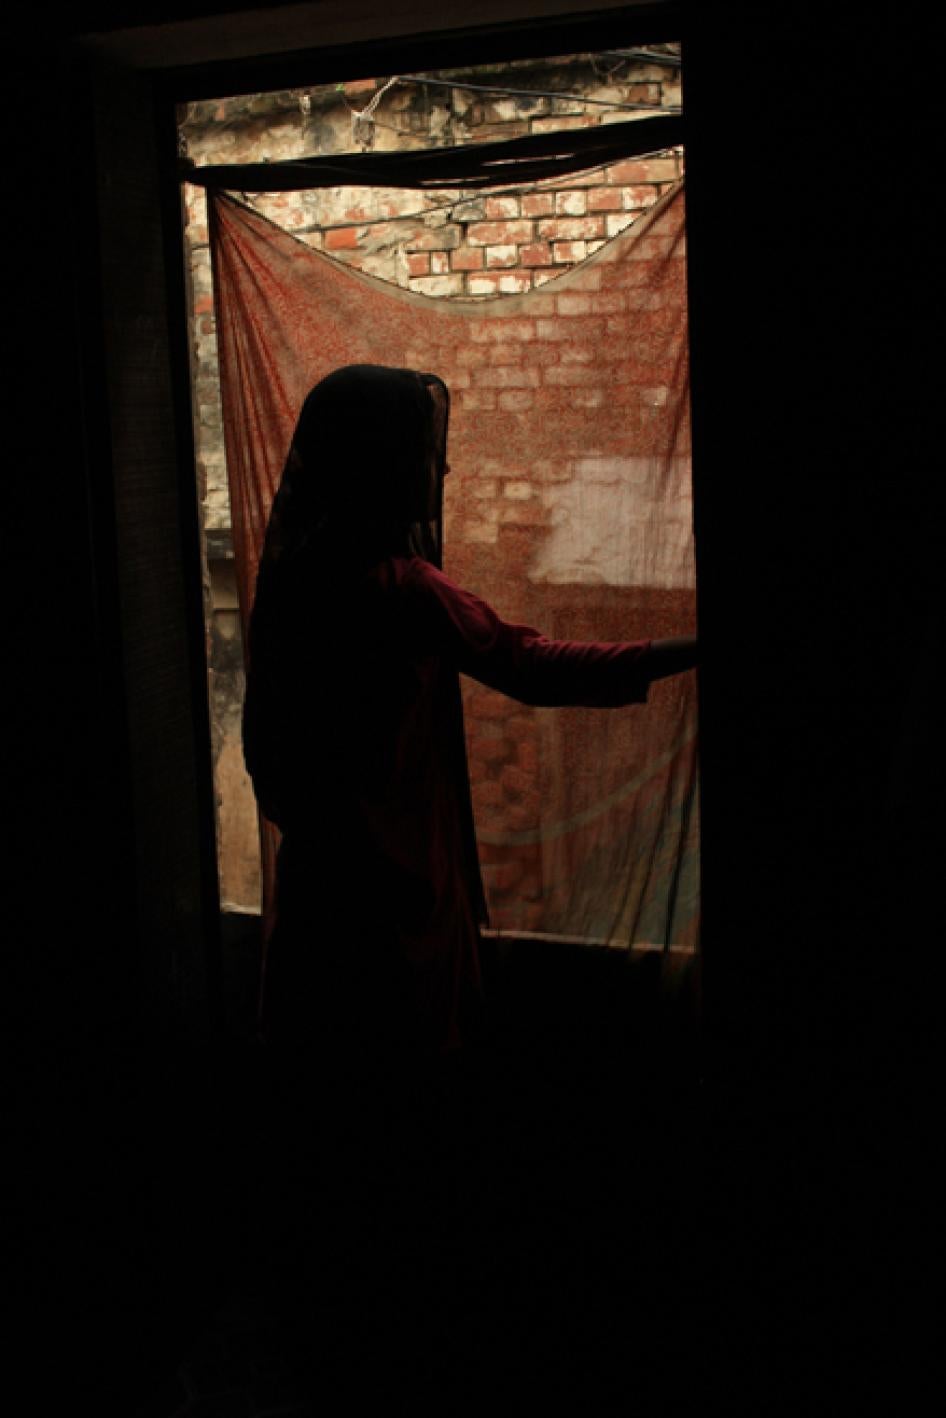 South Asia Failing to Address Its Child Rape Problem Human Rights Watch pic